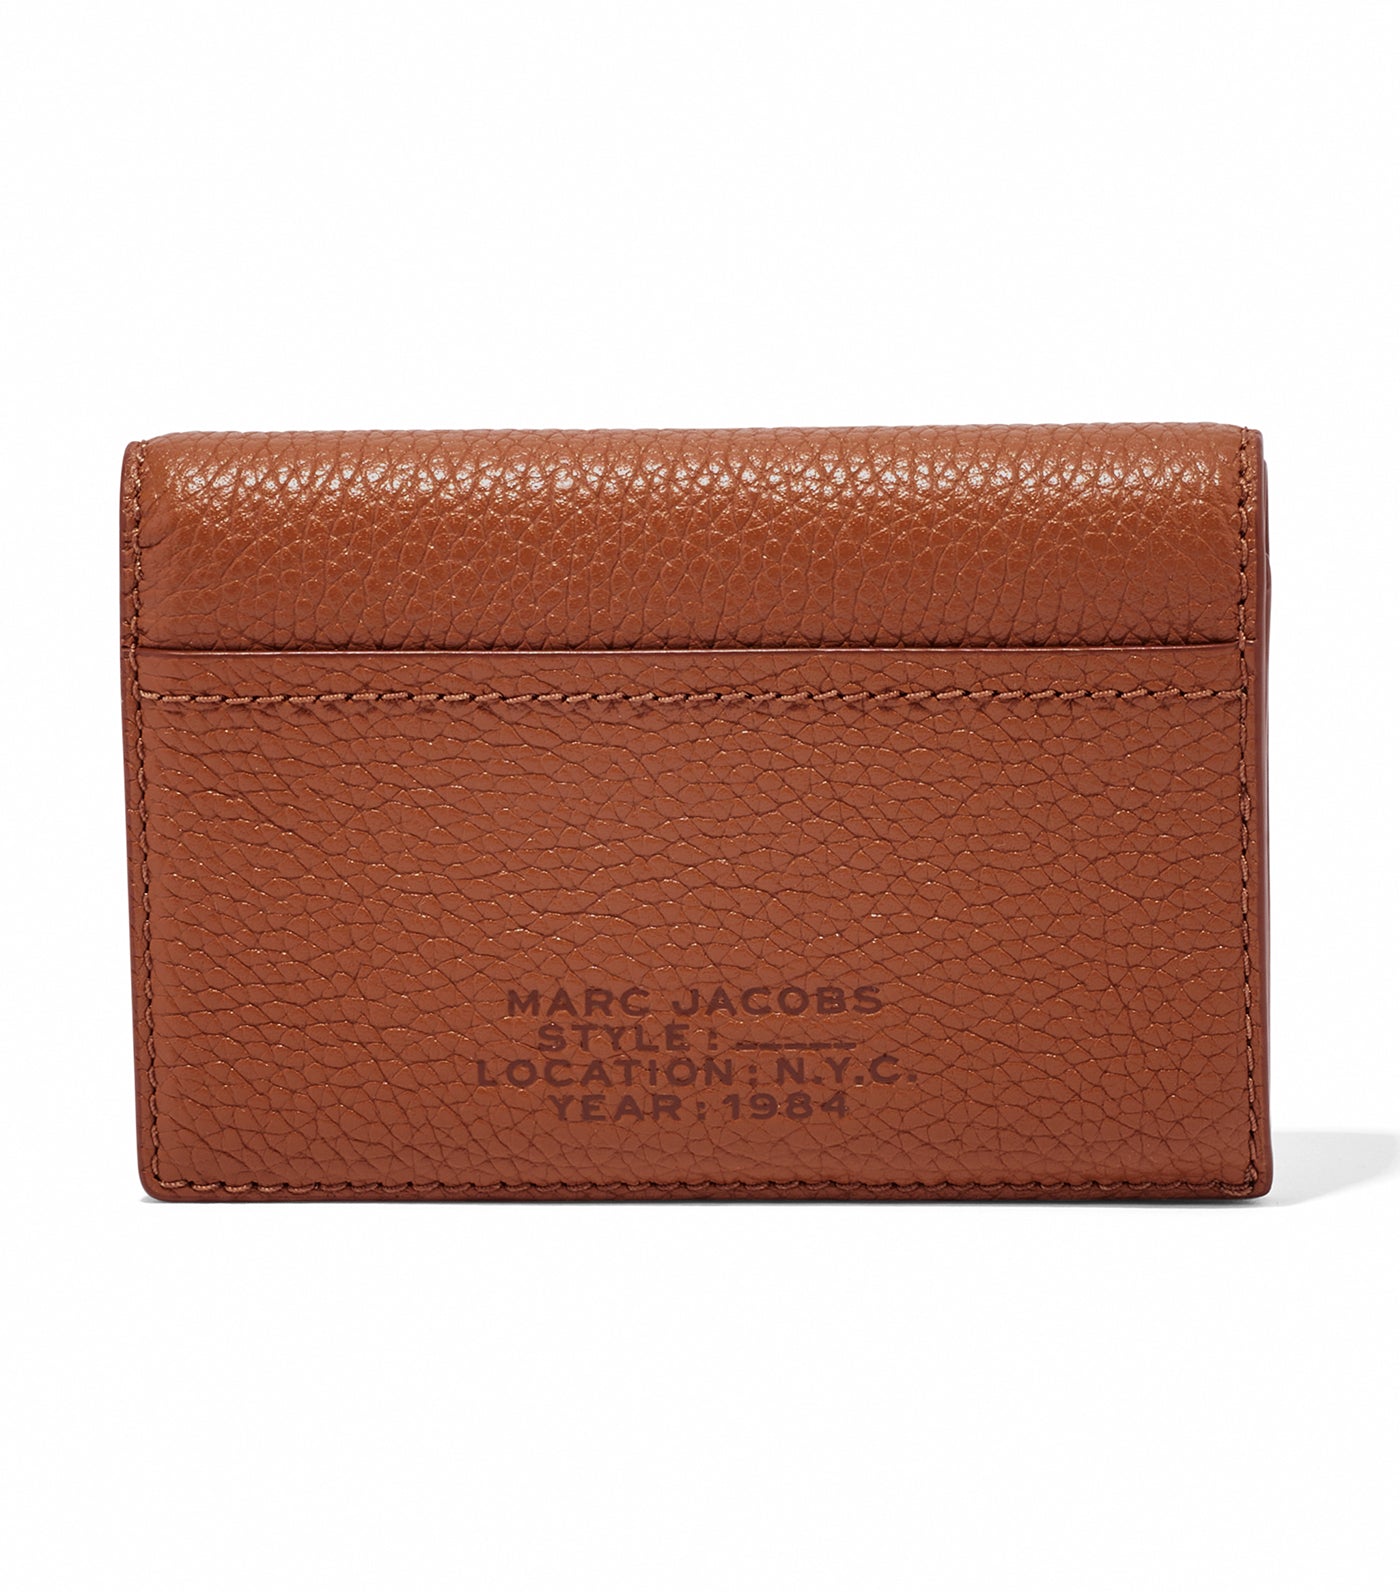 The Leather Small Bifold Wallet Argan Oil